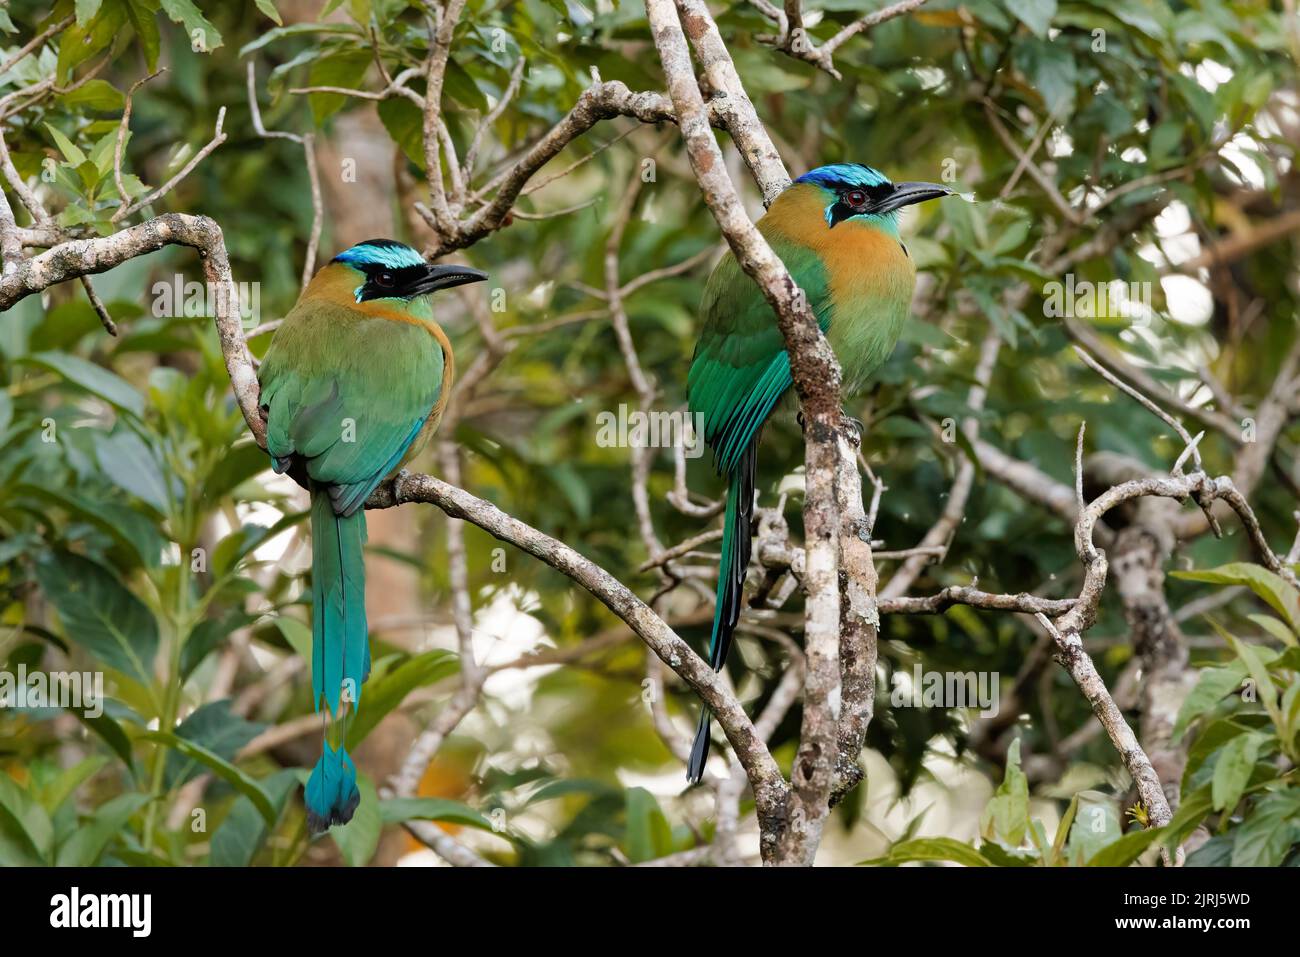 Couple of beautiful Lesson's motmots (Momotus lessonii) perching on branches near Santa Elena cloud forest in Costa Rica Stock Photo